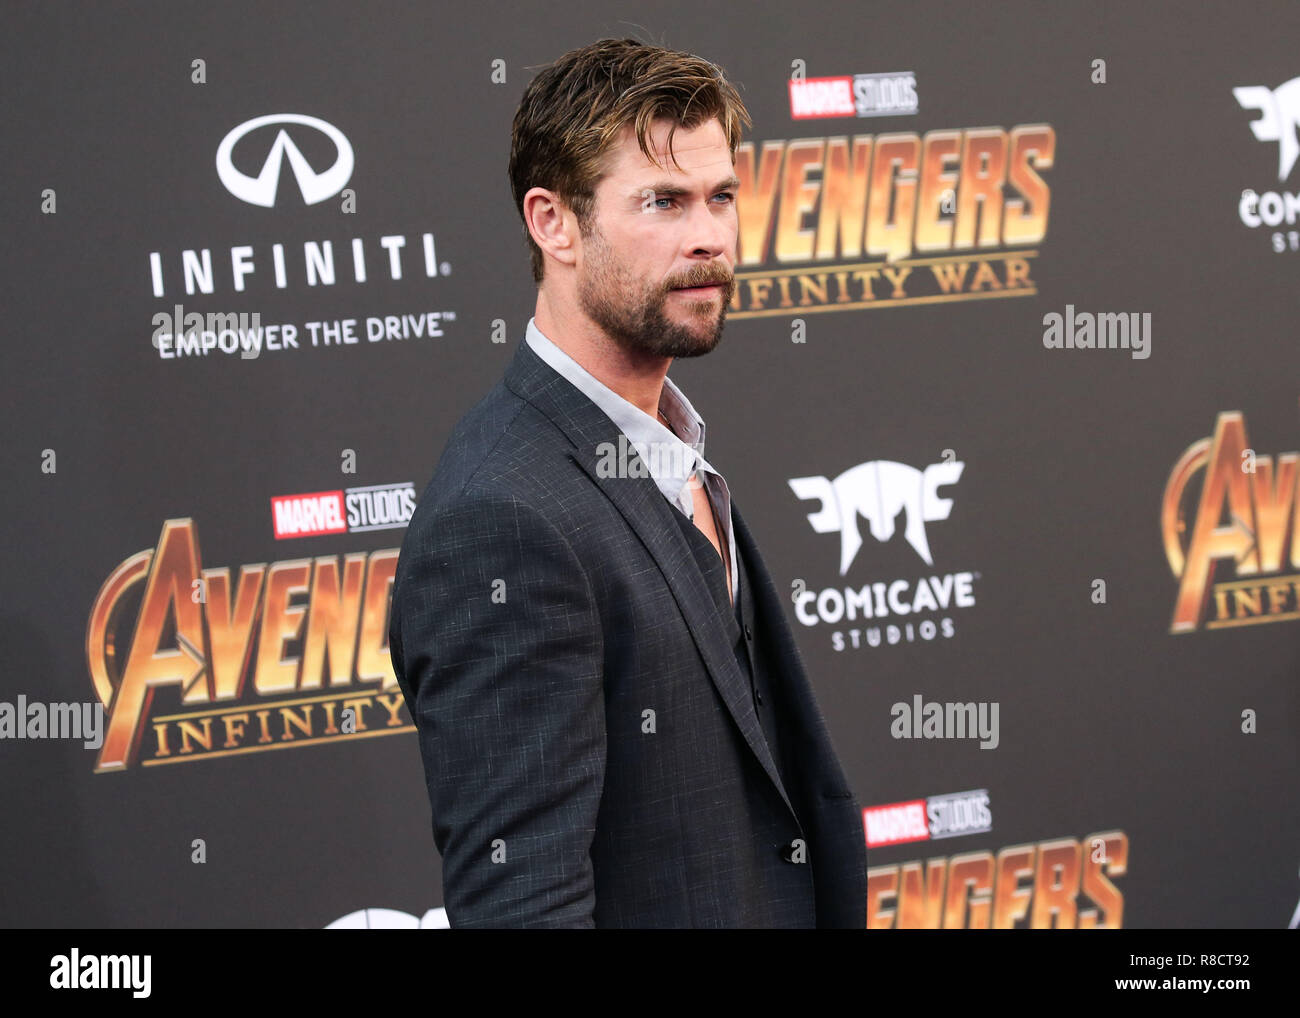 HOLLYWOOD, LOS ANGELES, CA, USA - APRIL 23: Chris Hemsworth at the World Premiere Of Disney And Marvel's 'Avengers: Infinity War' held at the El Capitan Theatre, Dolby Theatre and TCL Chinese Theatre IMAX on April 23, 2018 in Hollywood, Los Angeles, California, United States. (Photo by Xavier Collin/Image Press Agency) Stock Photo